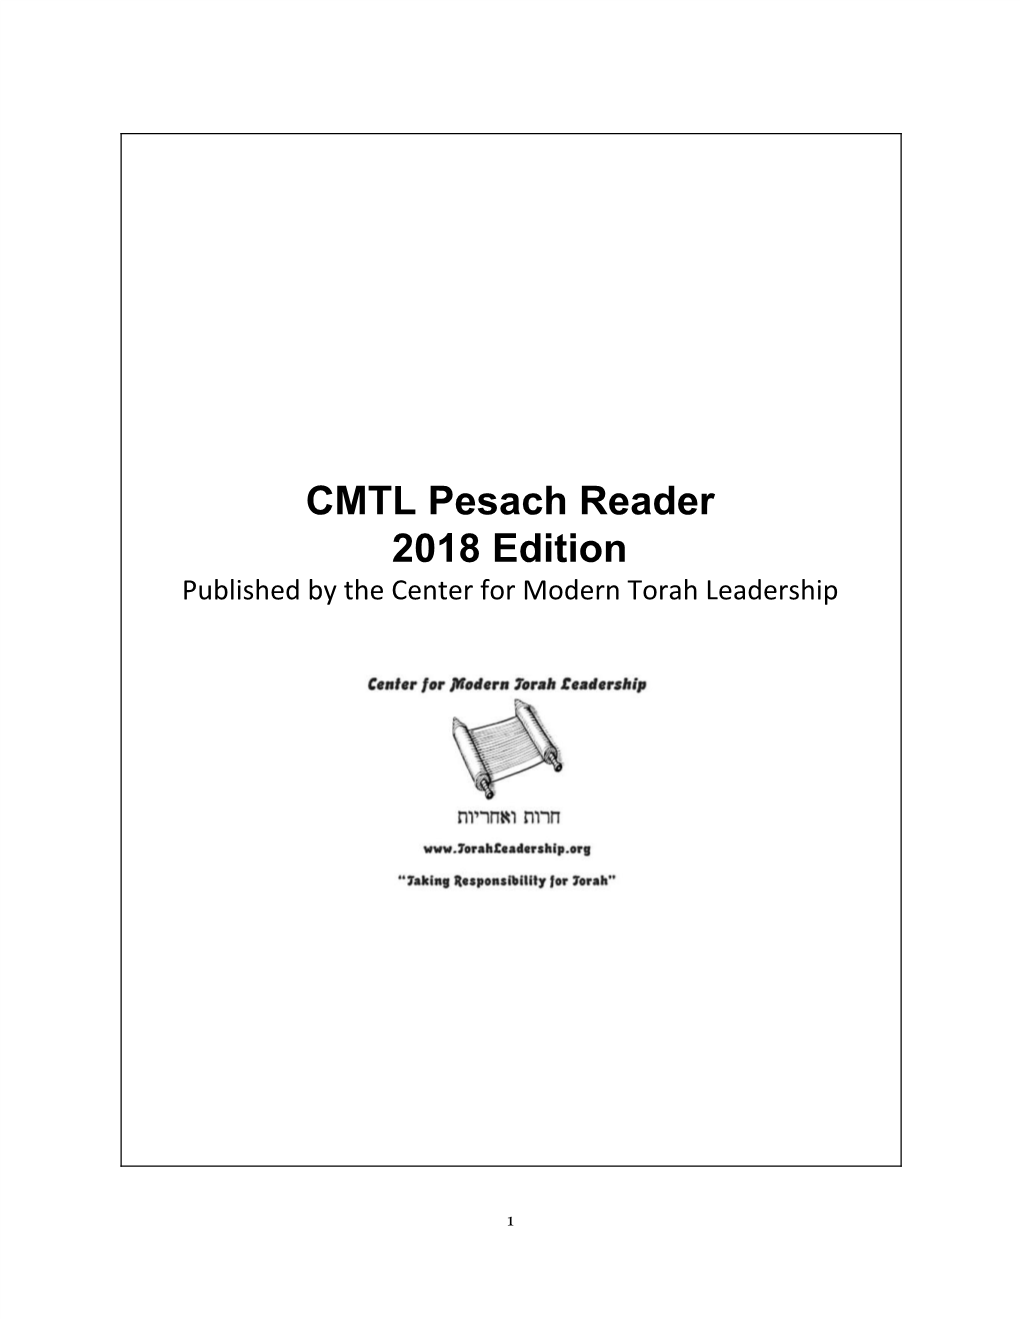 CMTL Pesach Reader 2018 Edition Published by the Center for Modern Torah Leadership